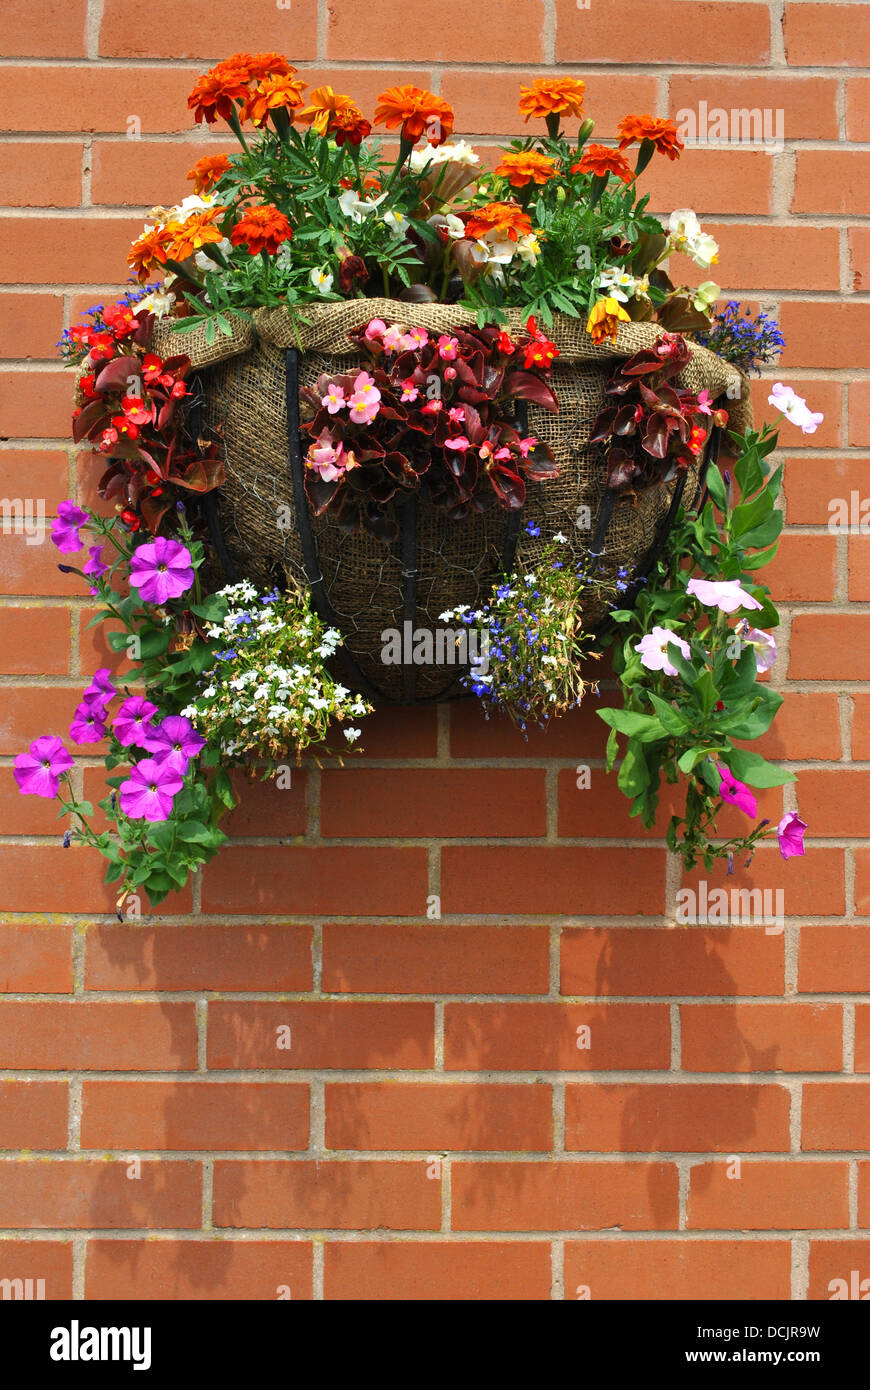 Hanging basket with bedding plants Stock Photo